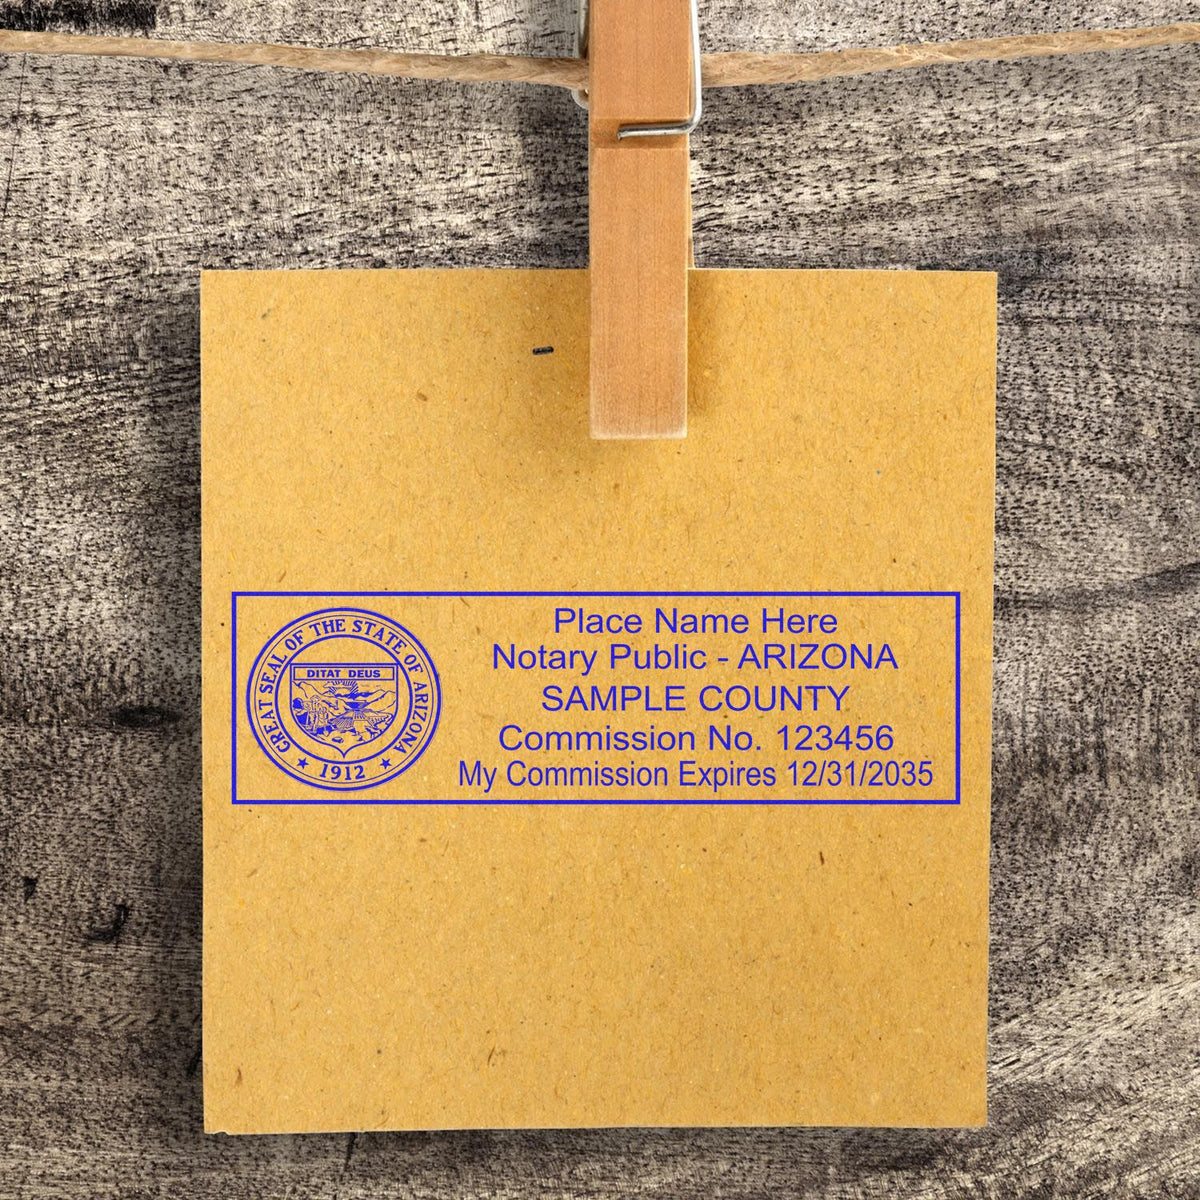 This paper is stamped with a sample imprint of the Wooden Handle Arizona State Seal Notary Public Stamp, signifying its quality and reliability.